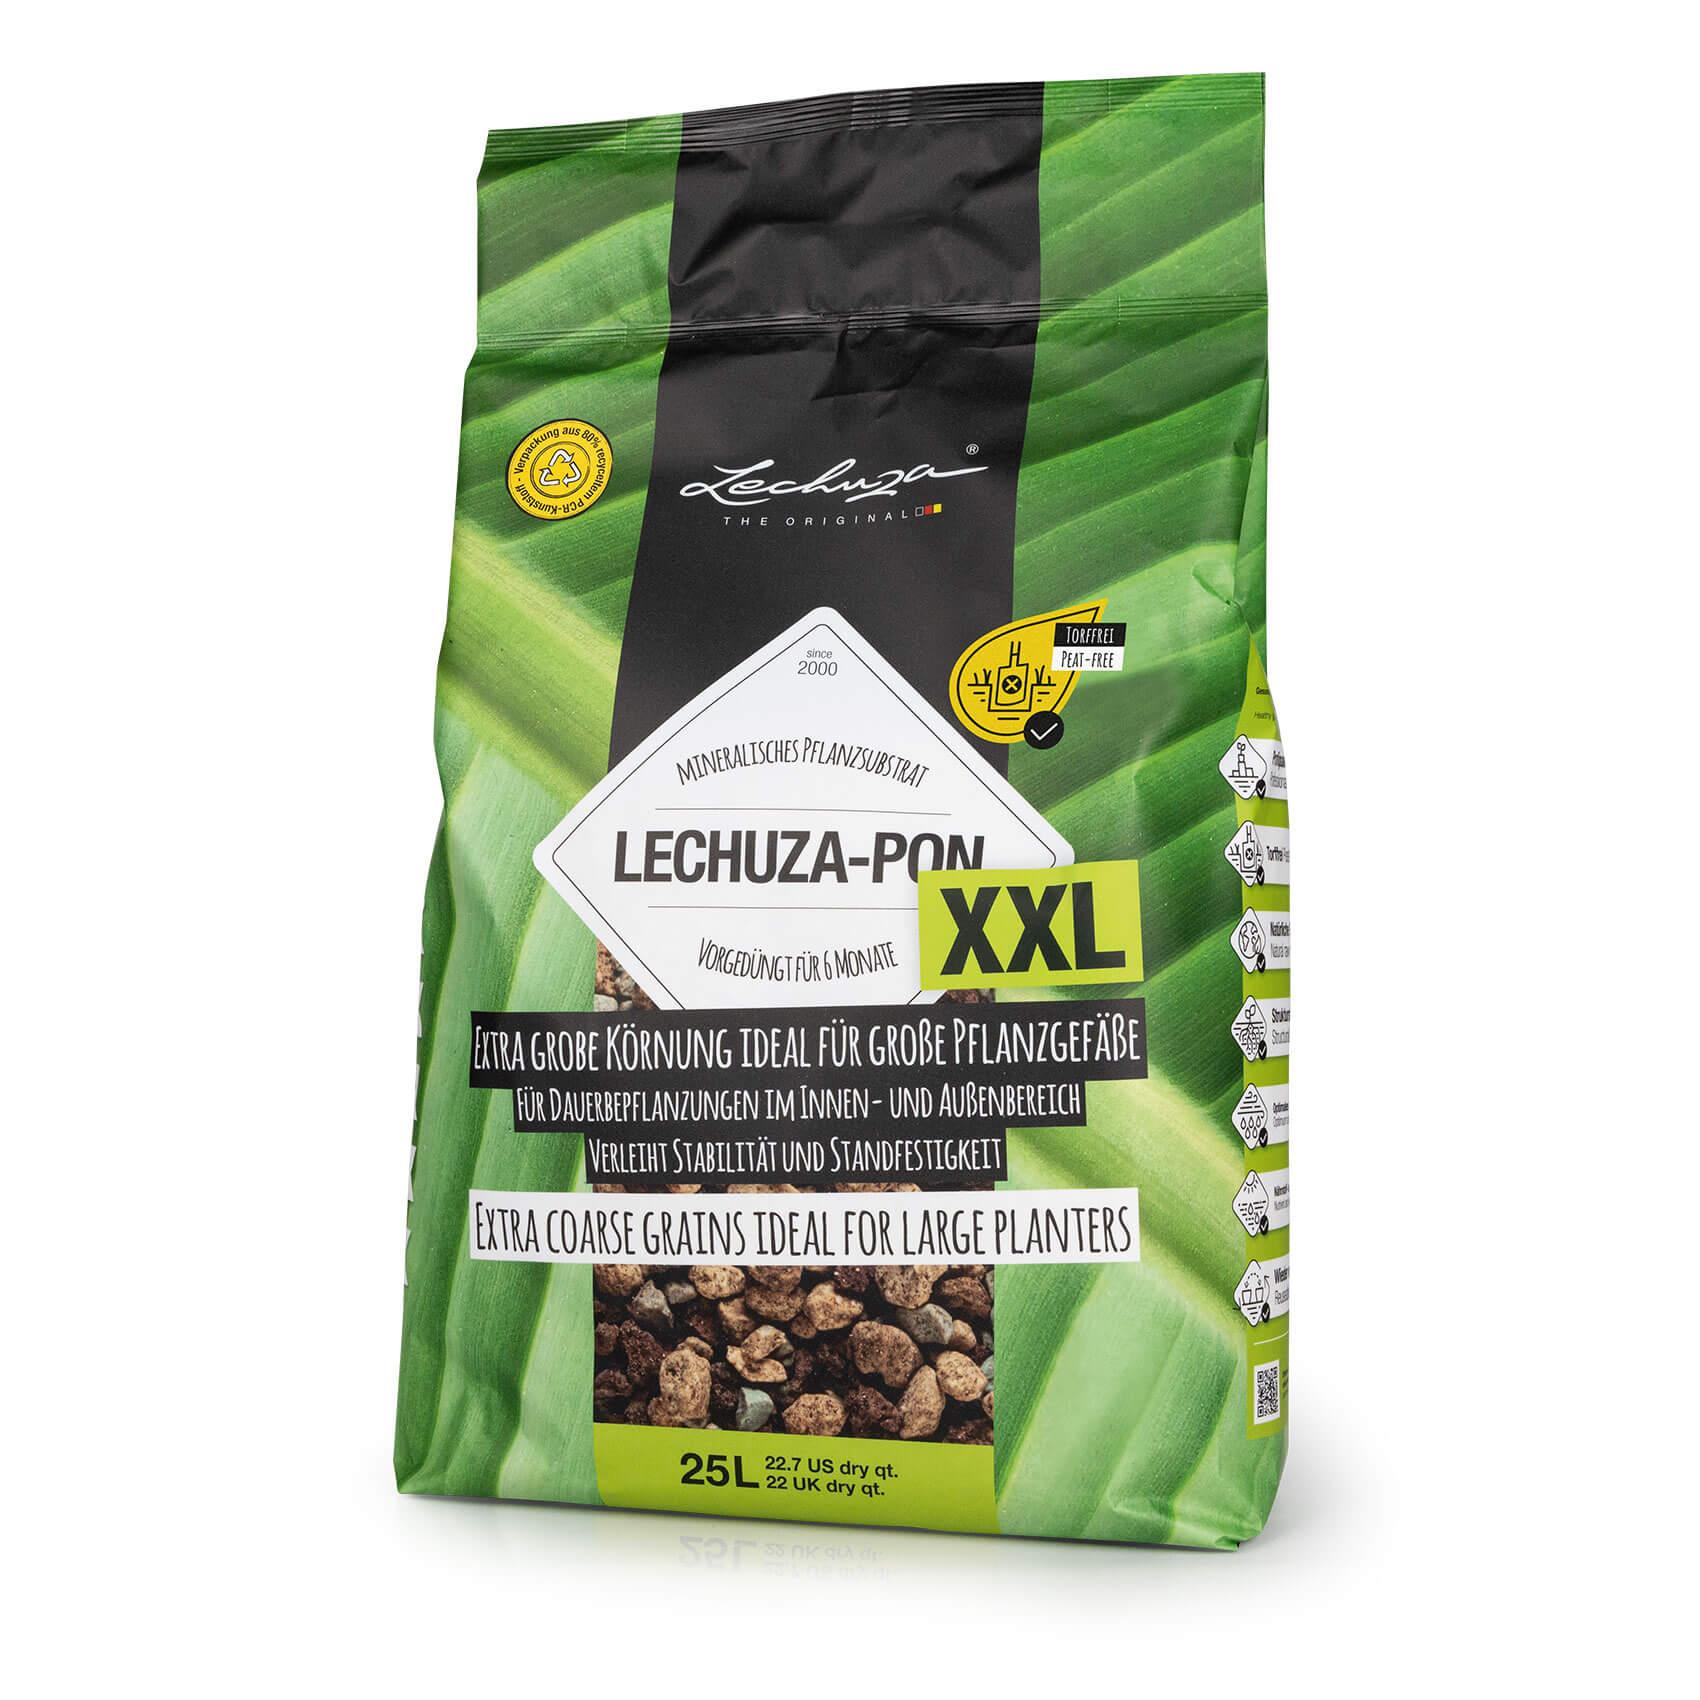 Lechuza PON Substrate - Interismo Online Shop Global